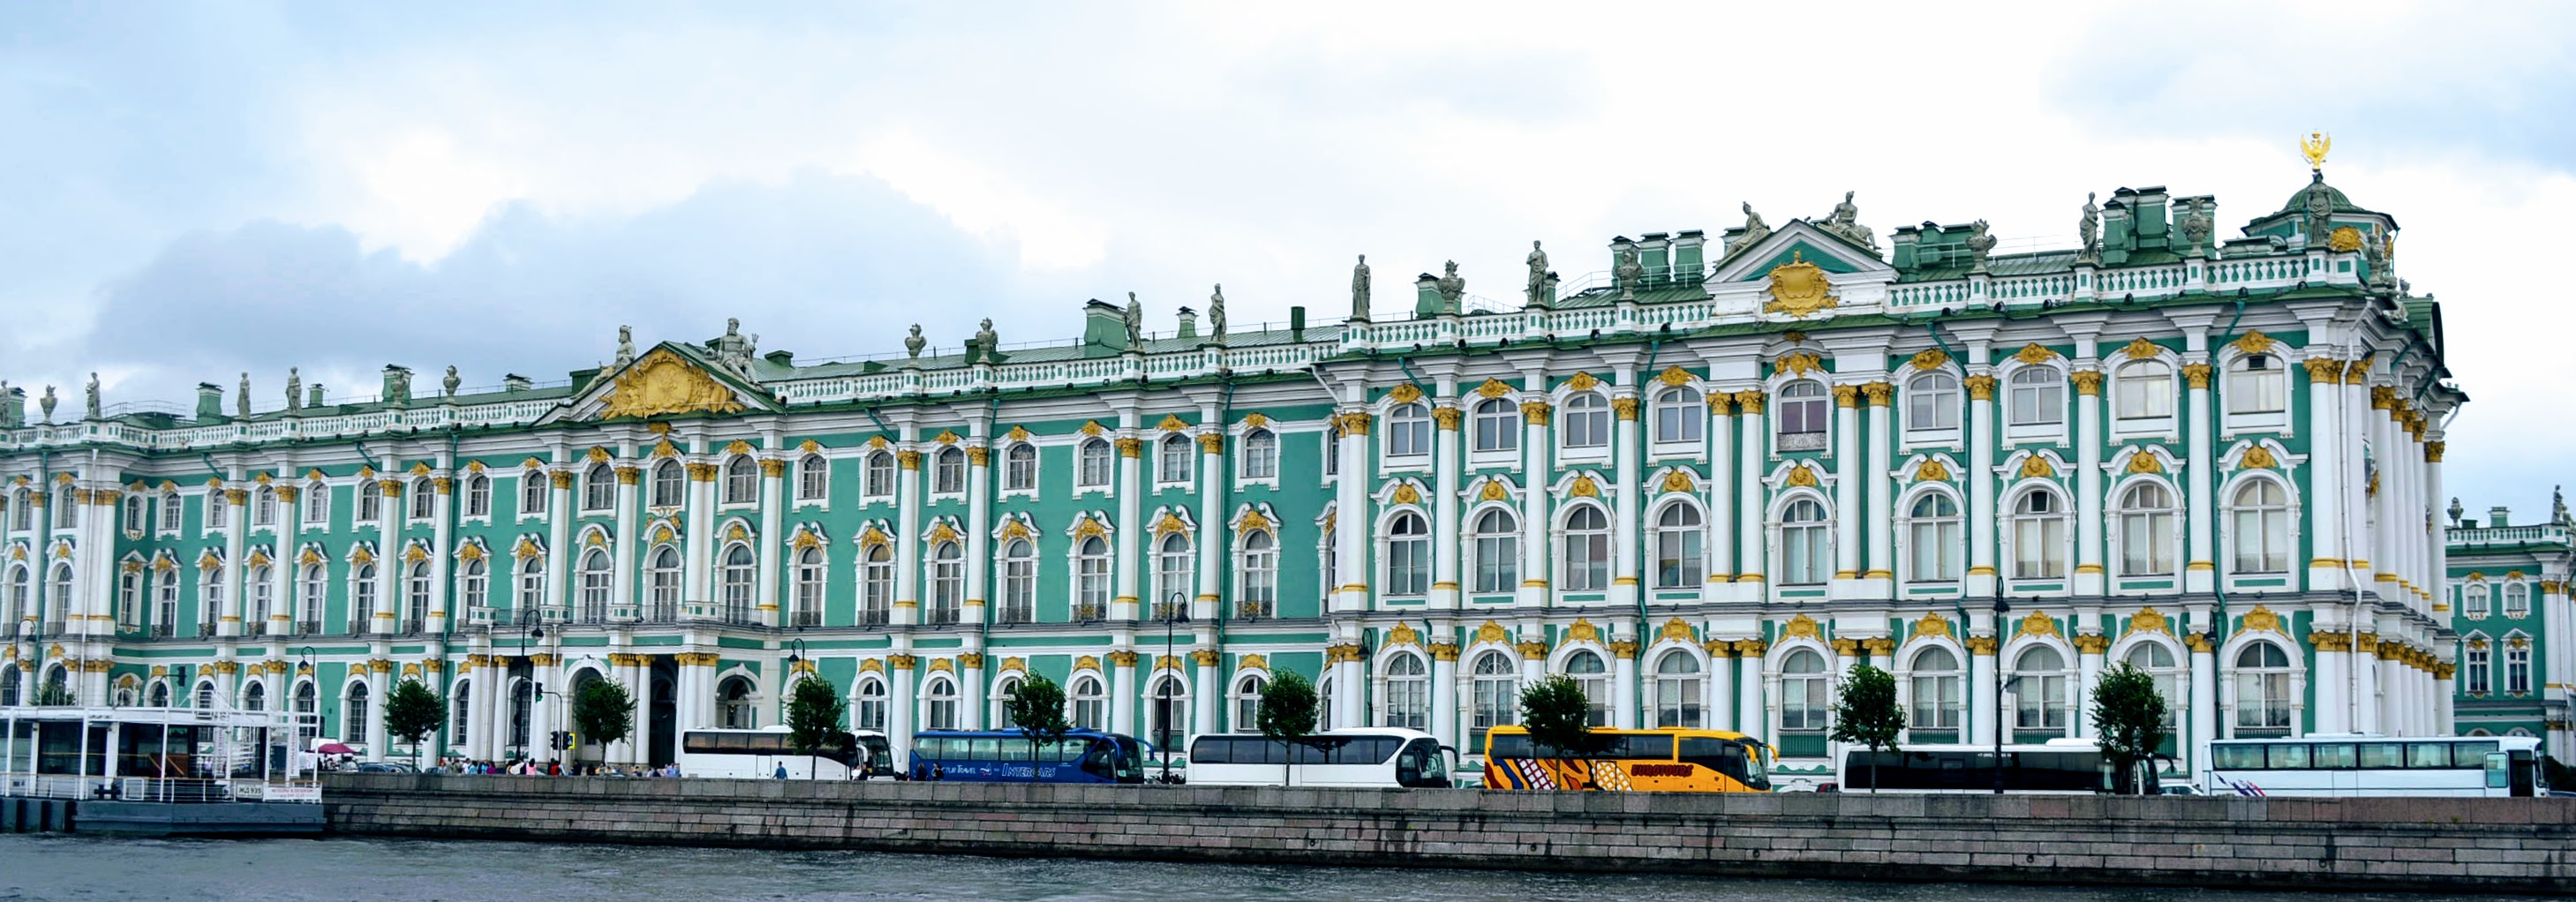 Hermitage State Museum from the Neva River